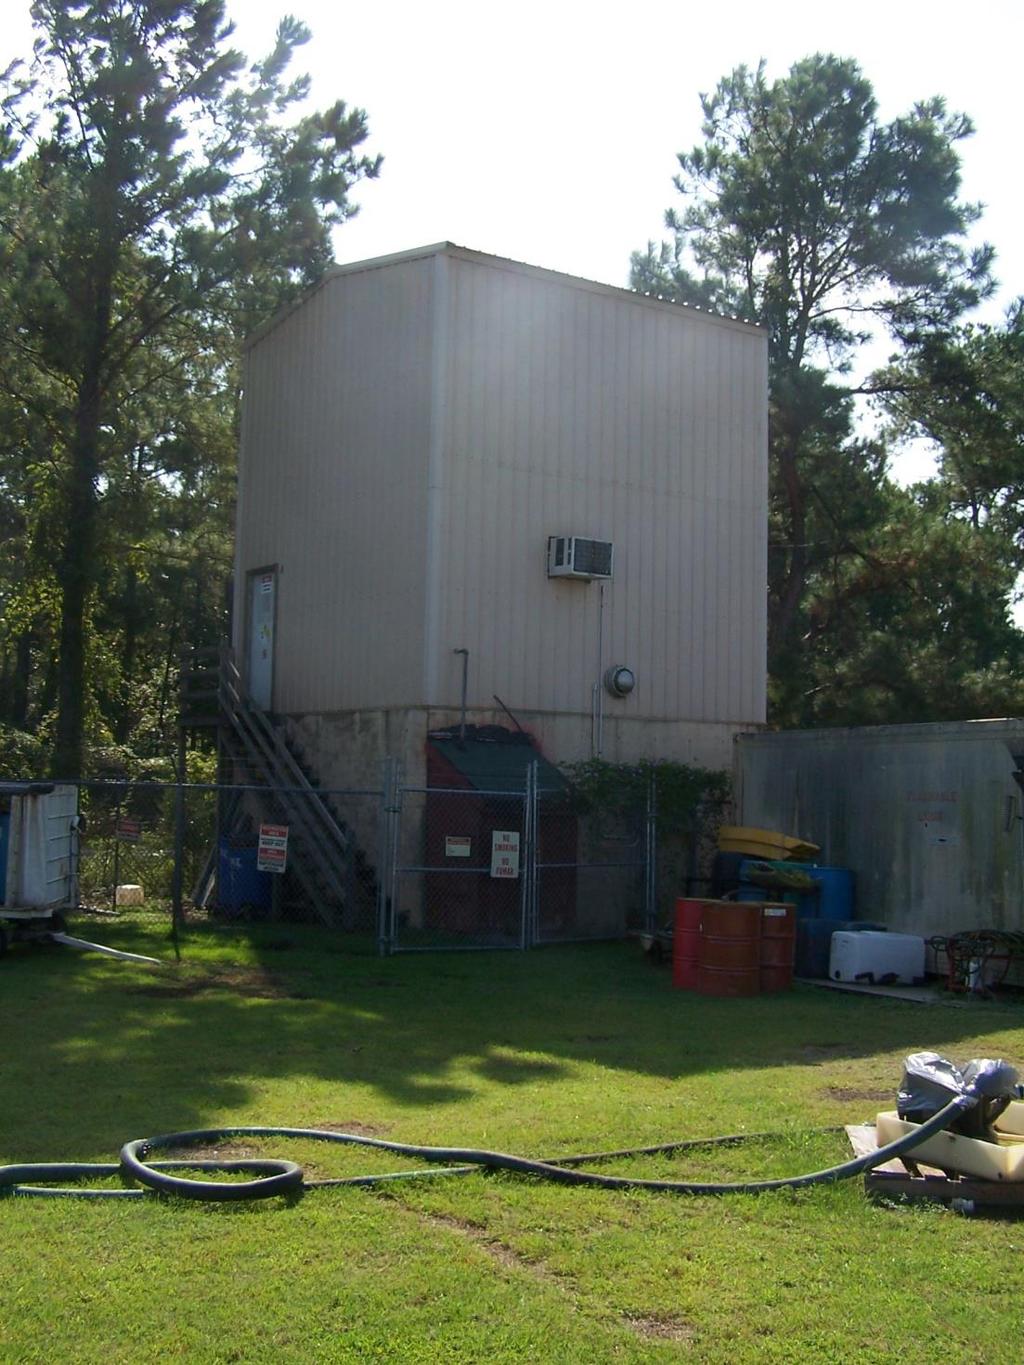 This building holds a 6,000 gallon tank that is used for mixing chemicals.